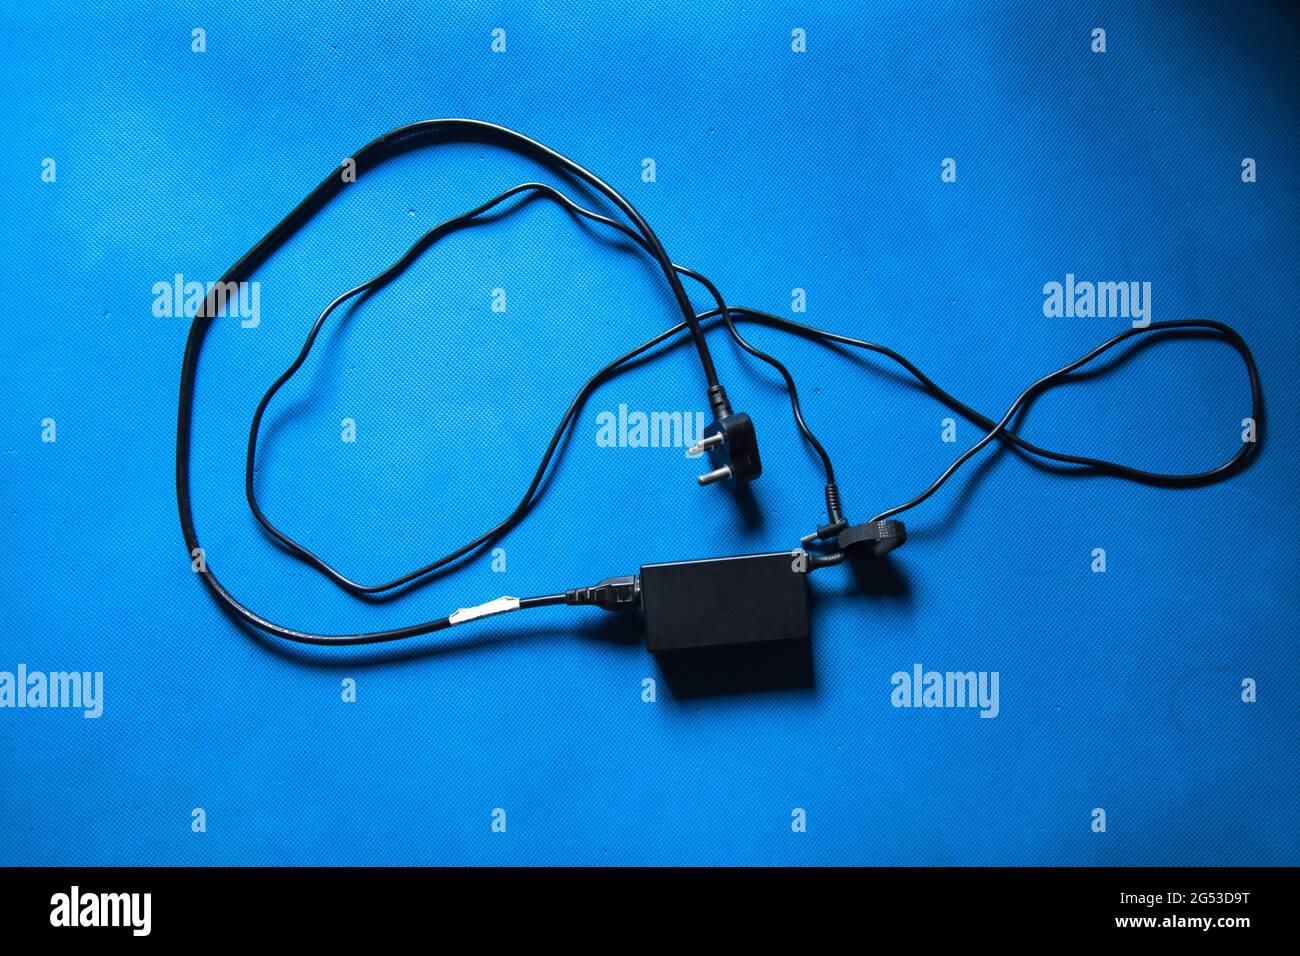 Laptop charging device on a background with use of selective focus Stock Photo